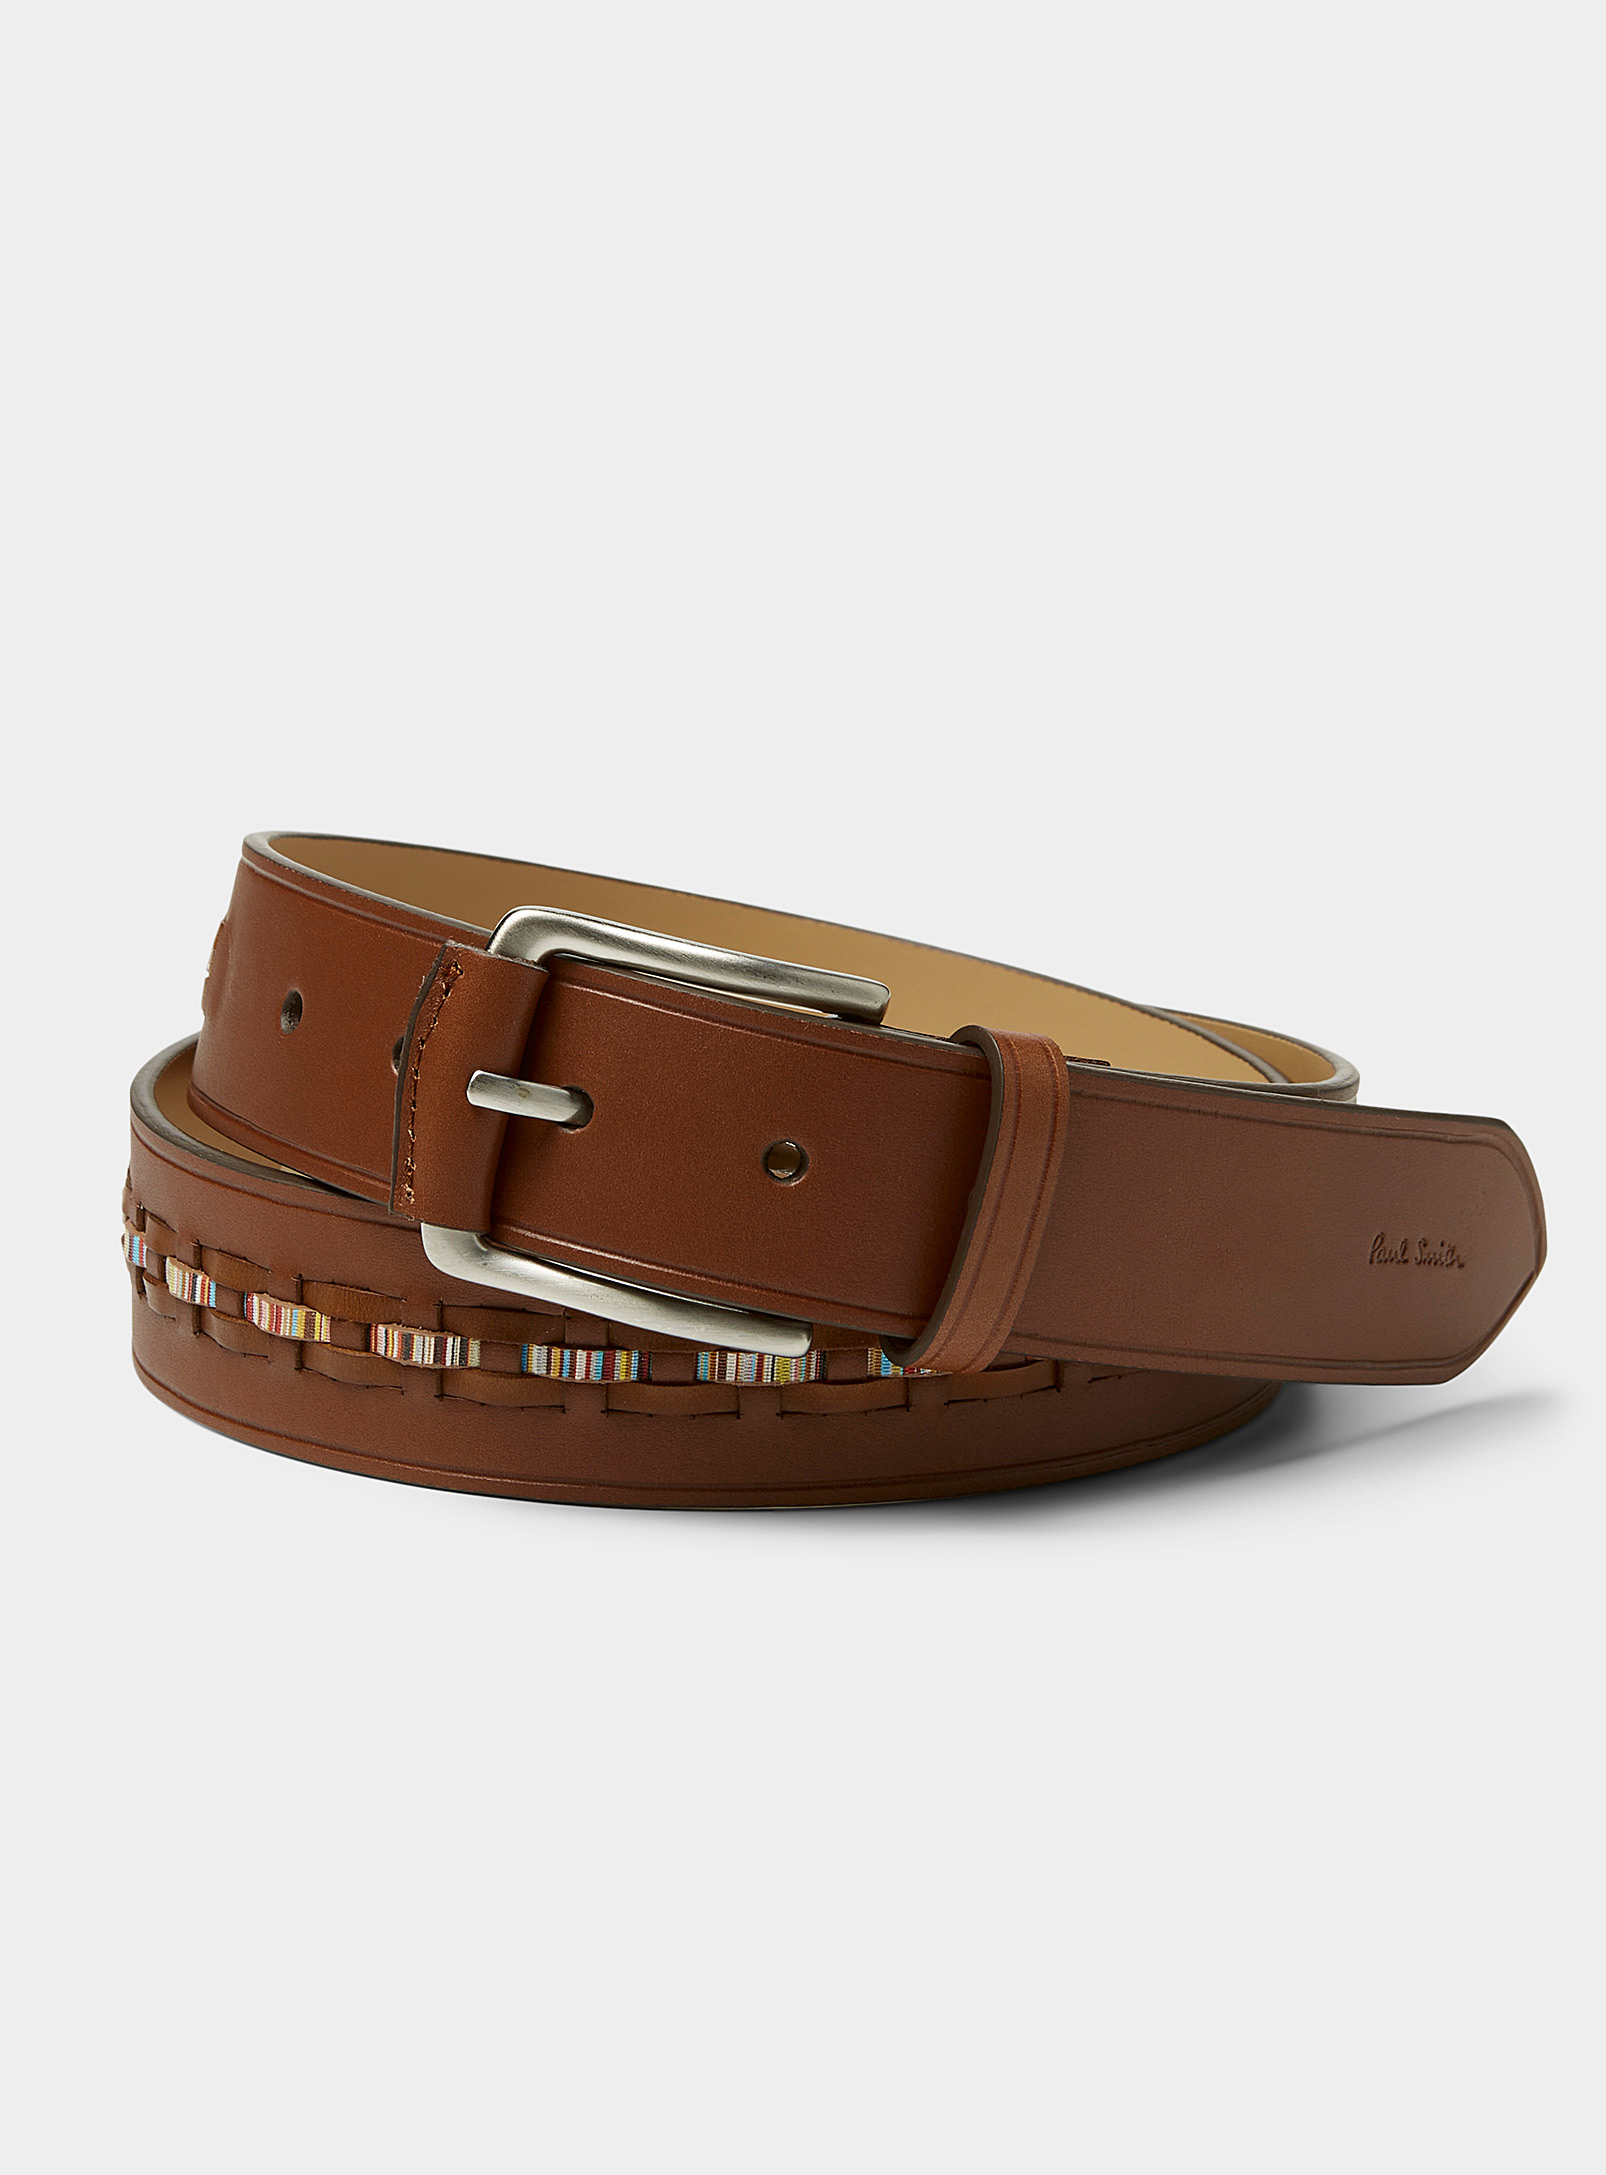 Paul Smith Colourful Braid Accent Leather Belt In Brown